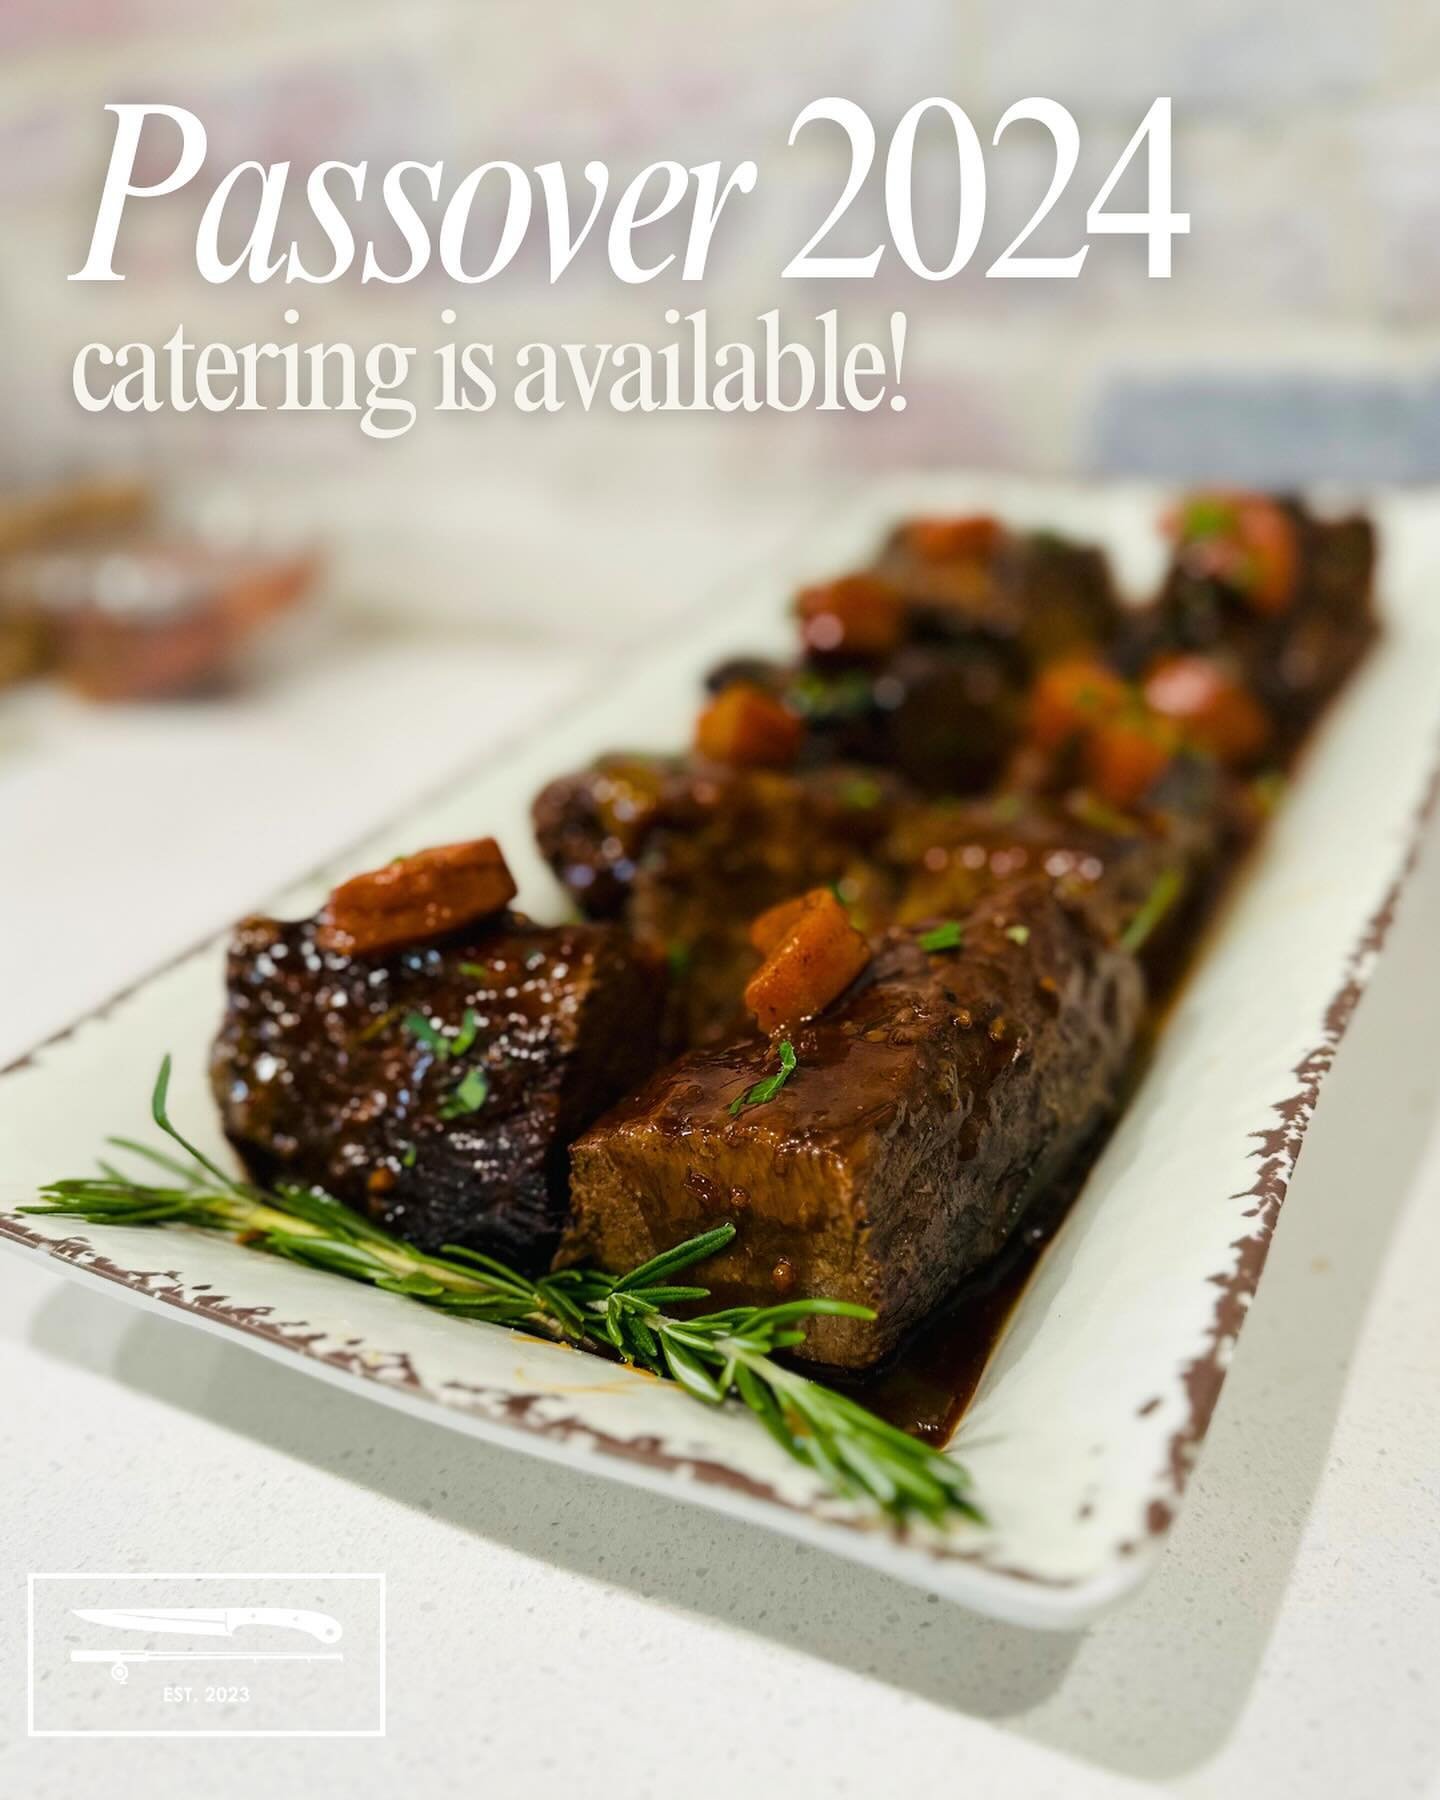 curate a delicious Passover meal with chef-prepared mains &amp; sides that your guests are sure to swoon over. don&rsquo;t forget to send us your catering order by this friday, april 19th at 3 PM! 

&bull; catering menu on second slide! &bull; for a 